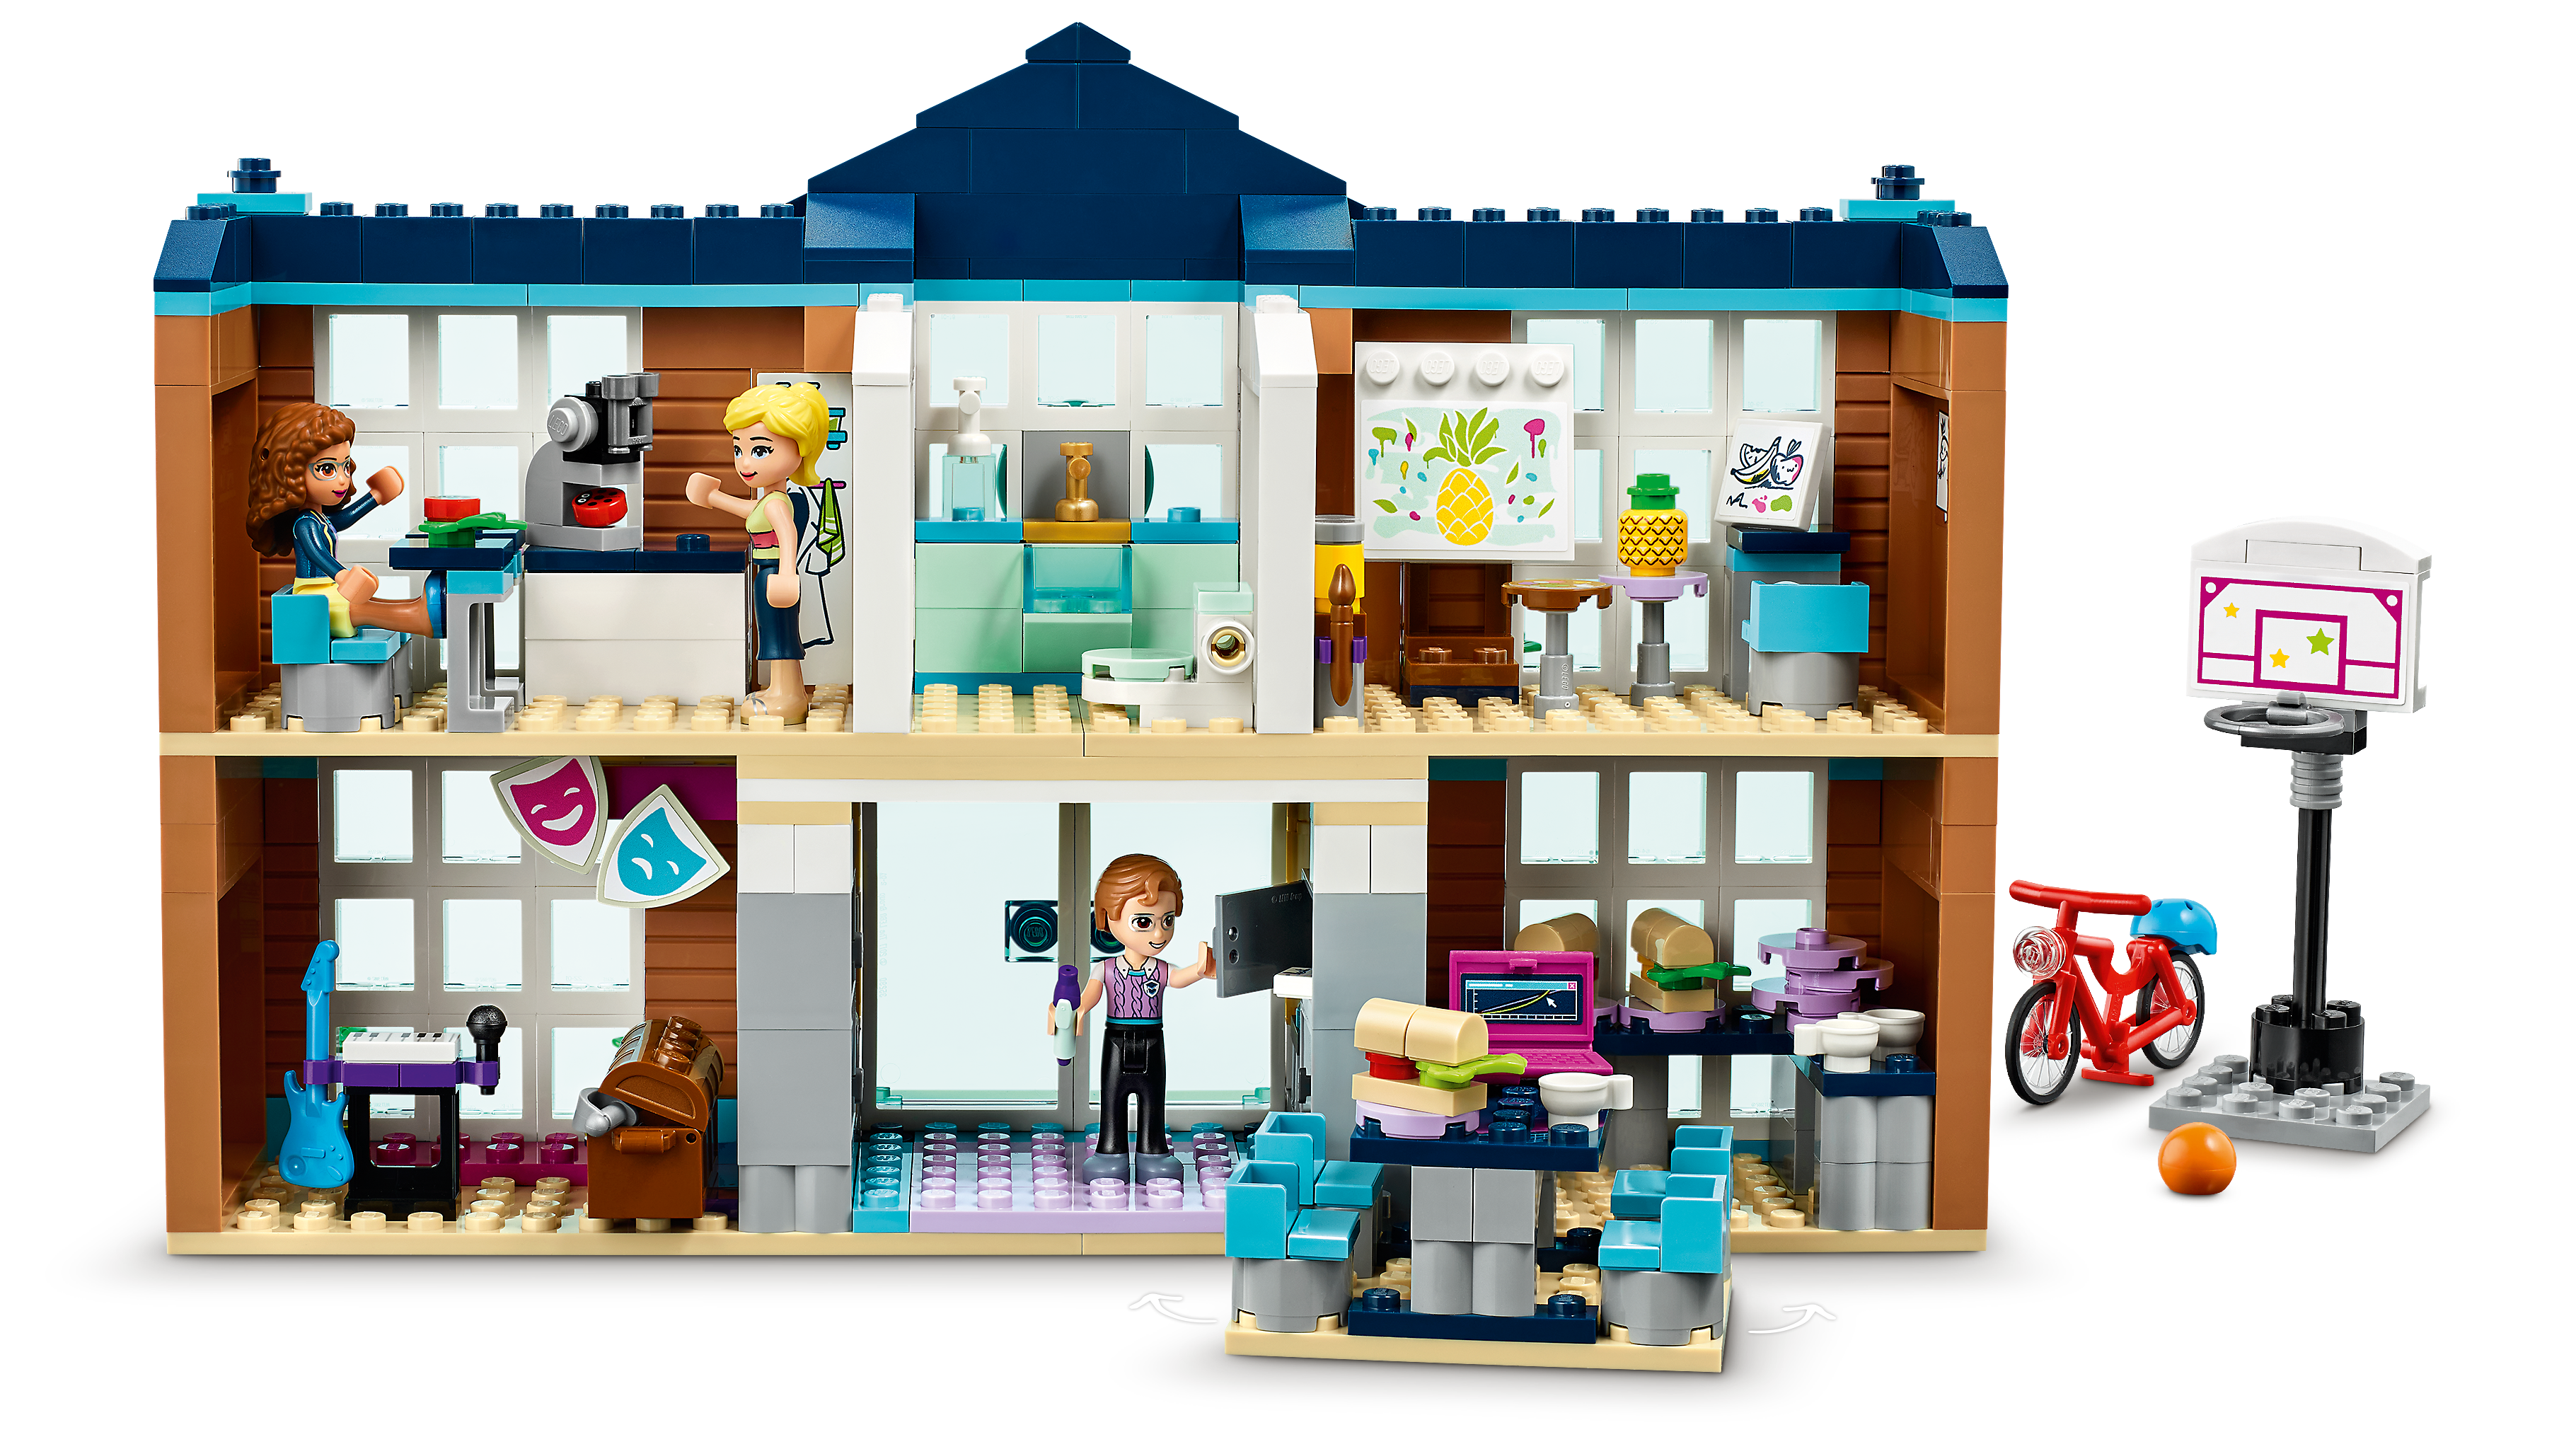 41682 LEGO Friends Heartlake City School Playset 605 Pieces Age 6 Years+